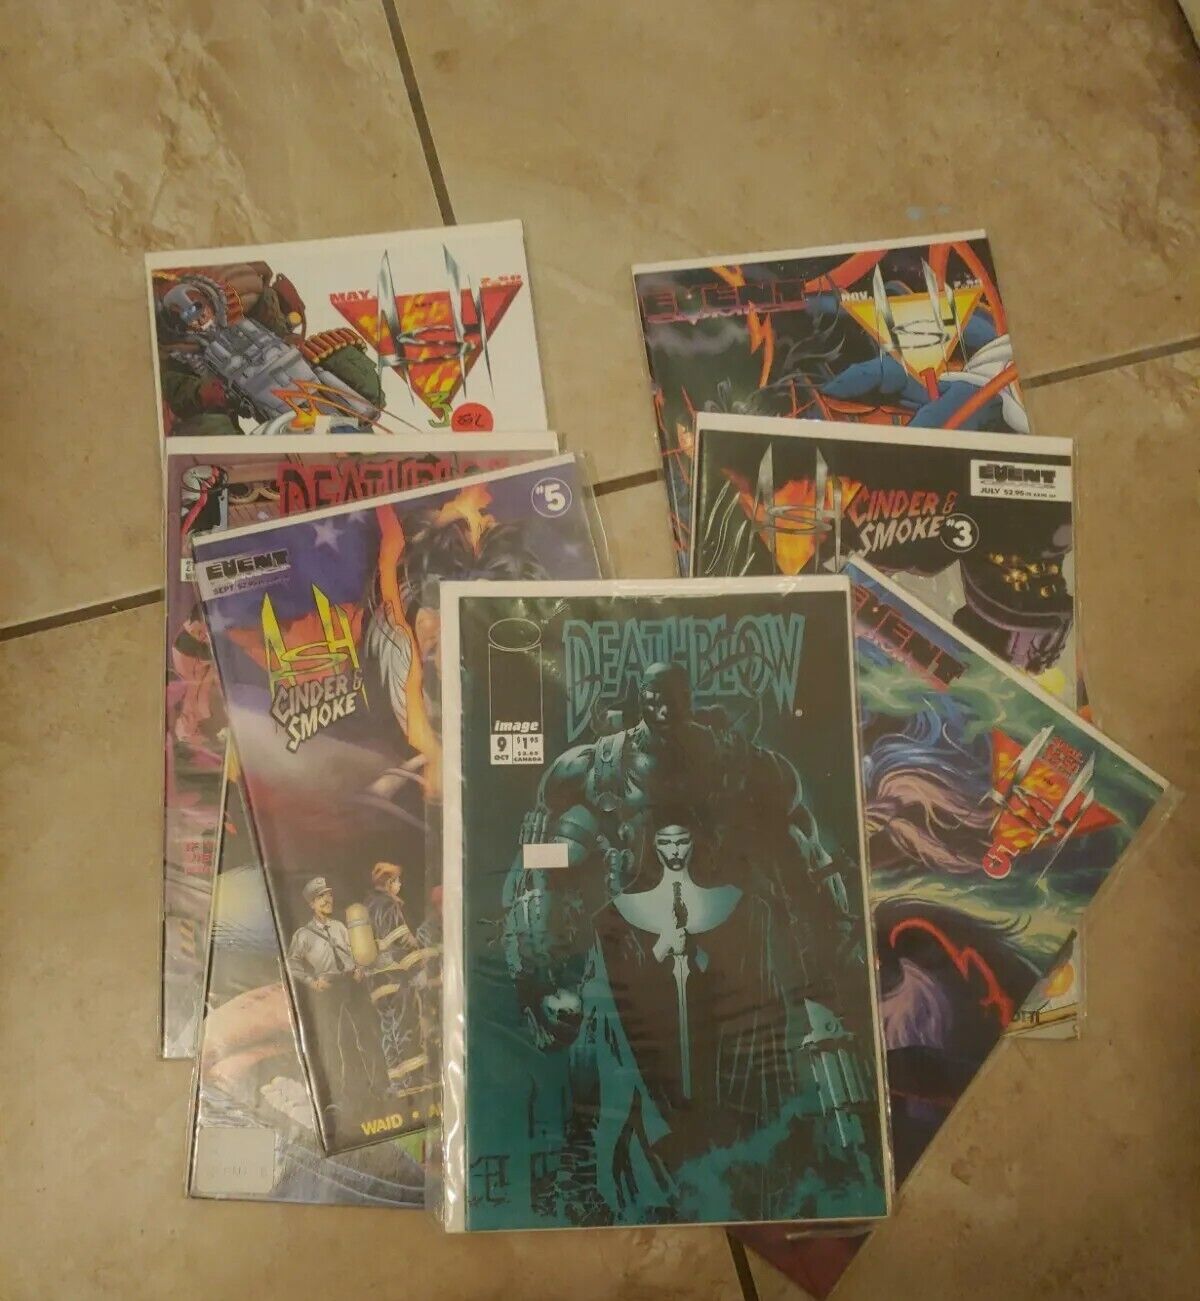 Mixed Indie Comic Book Lot. Deathblow, Ash 7 books boarded